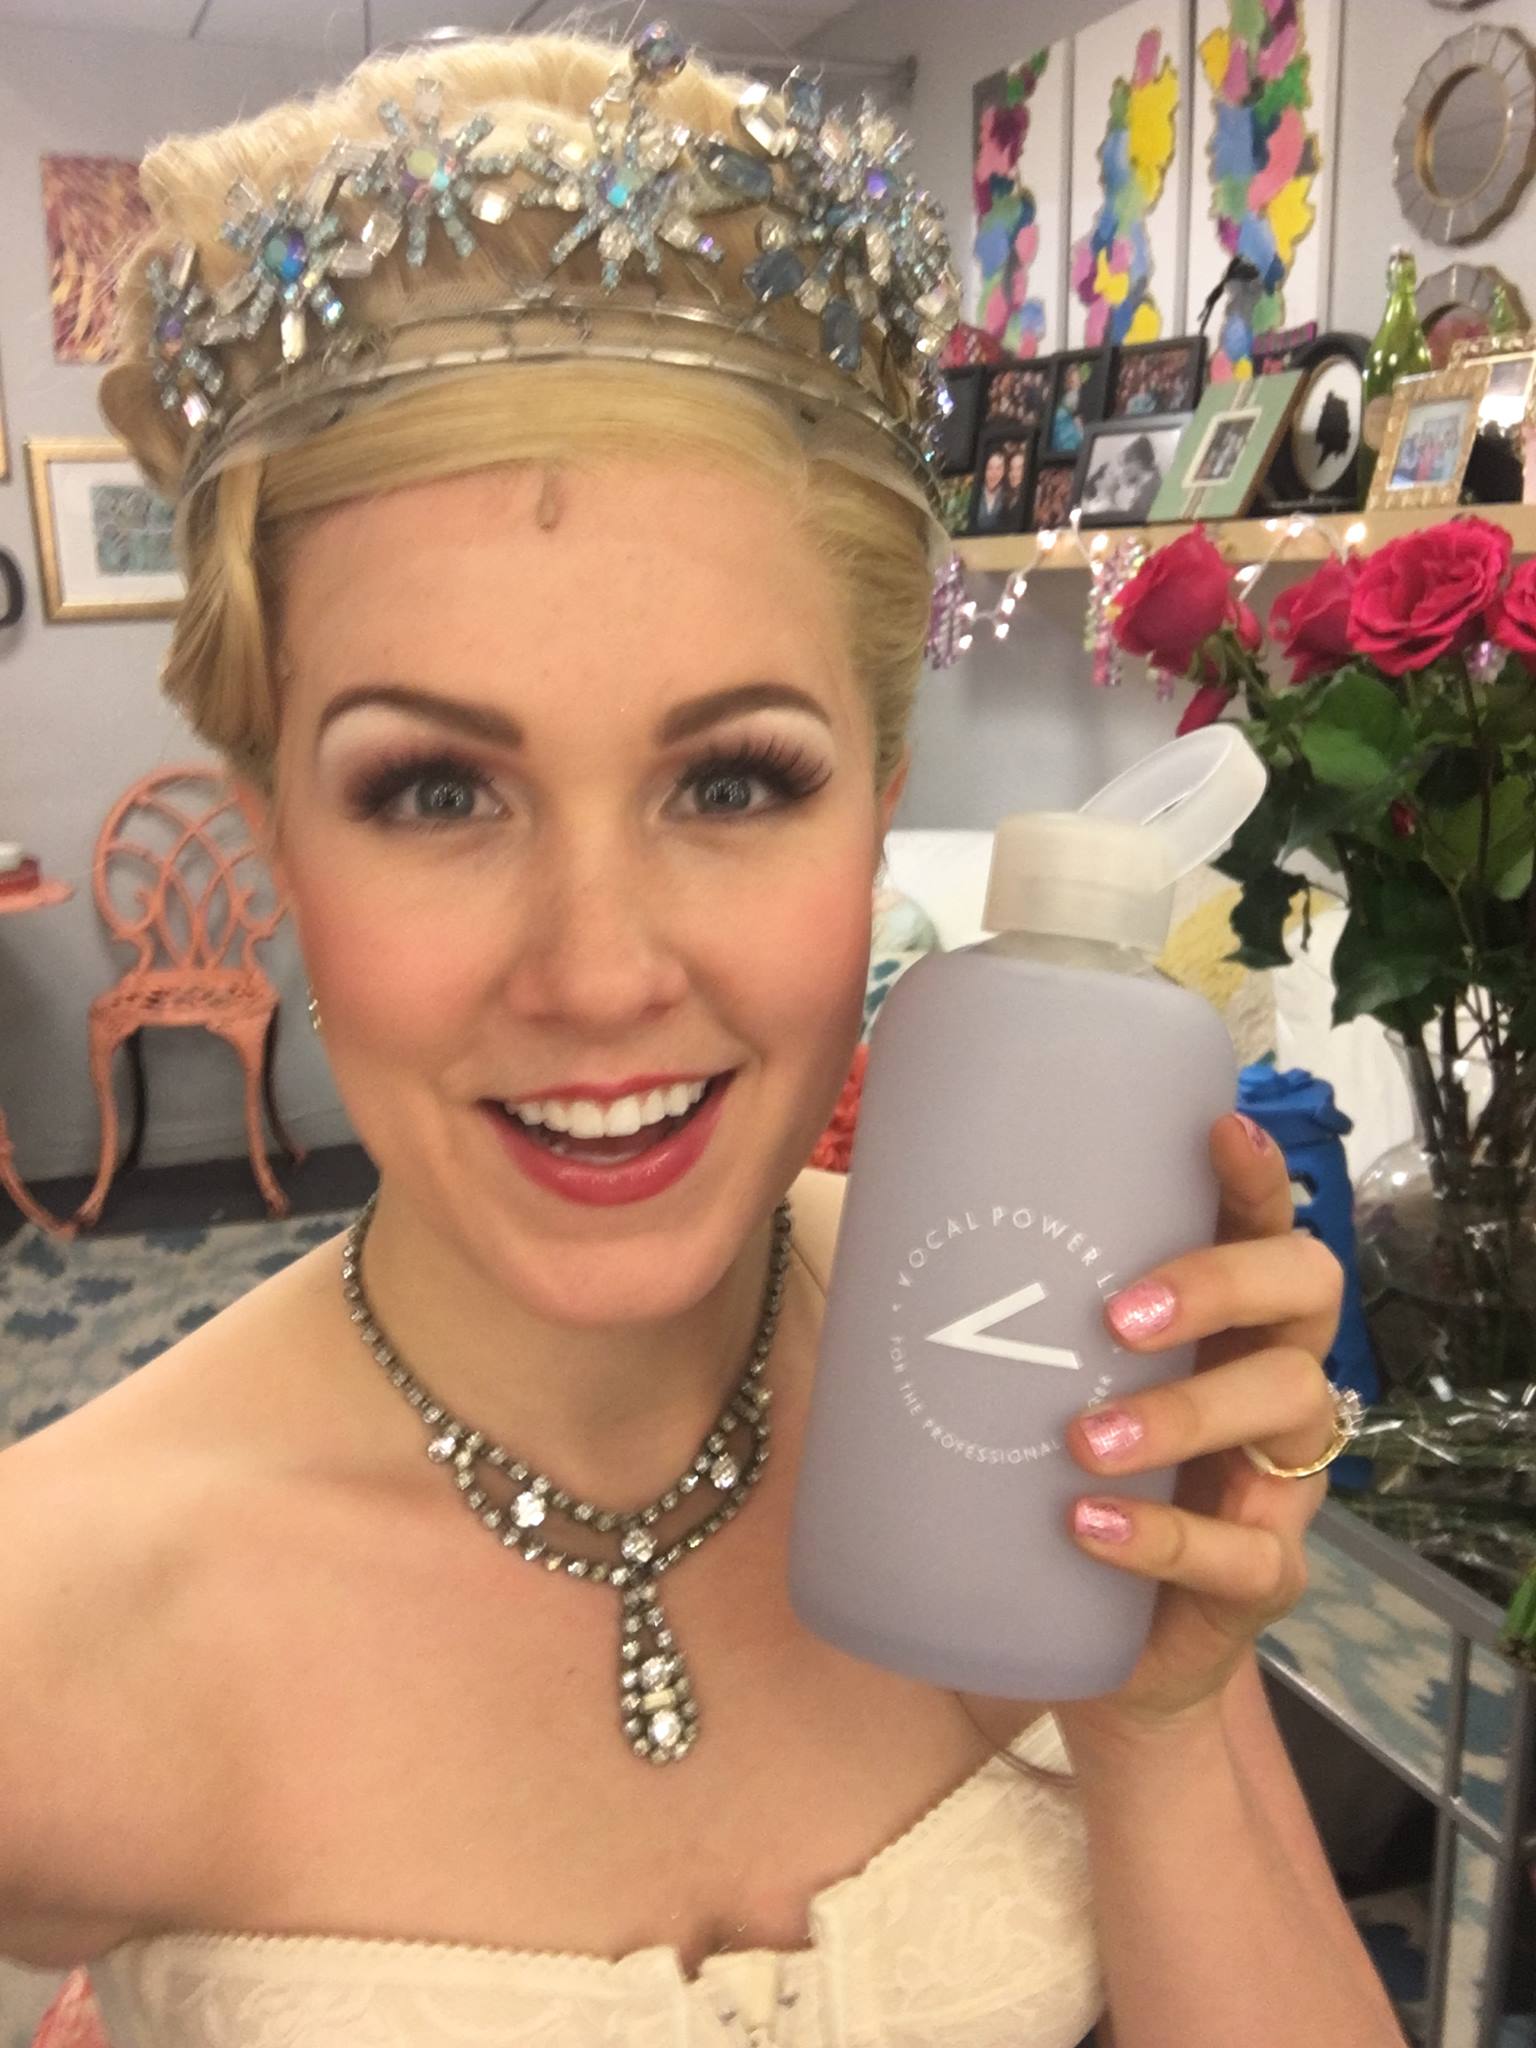   Ginna Claire Mason, the day of her Broadway debut in her dream role as Glinda in WICKED!  